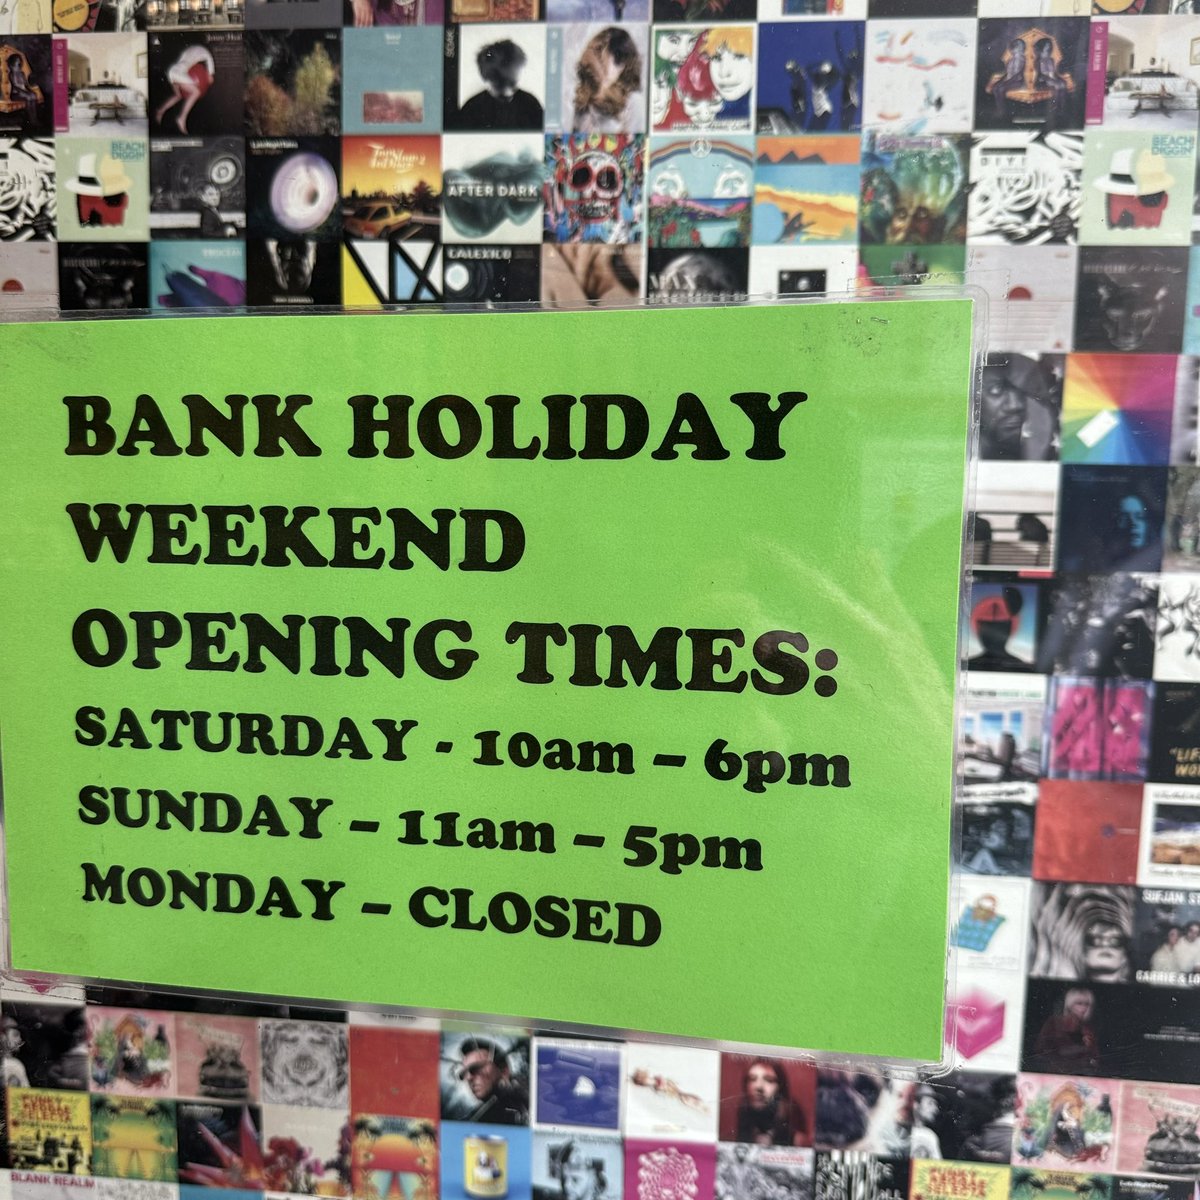 That’s it for today. Closed tomorrow for Bank Holiday Monday, back OPEN Tuesday morning at 10am. See you then 👋 Online 24/7 piccadillyrecords.com